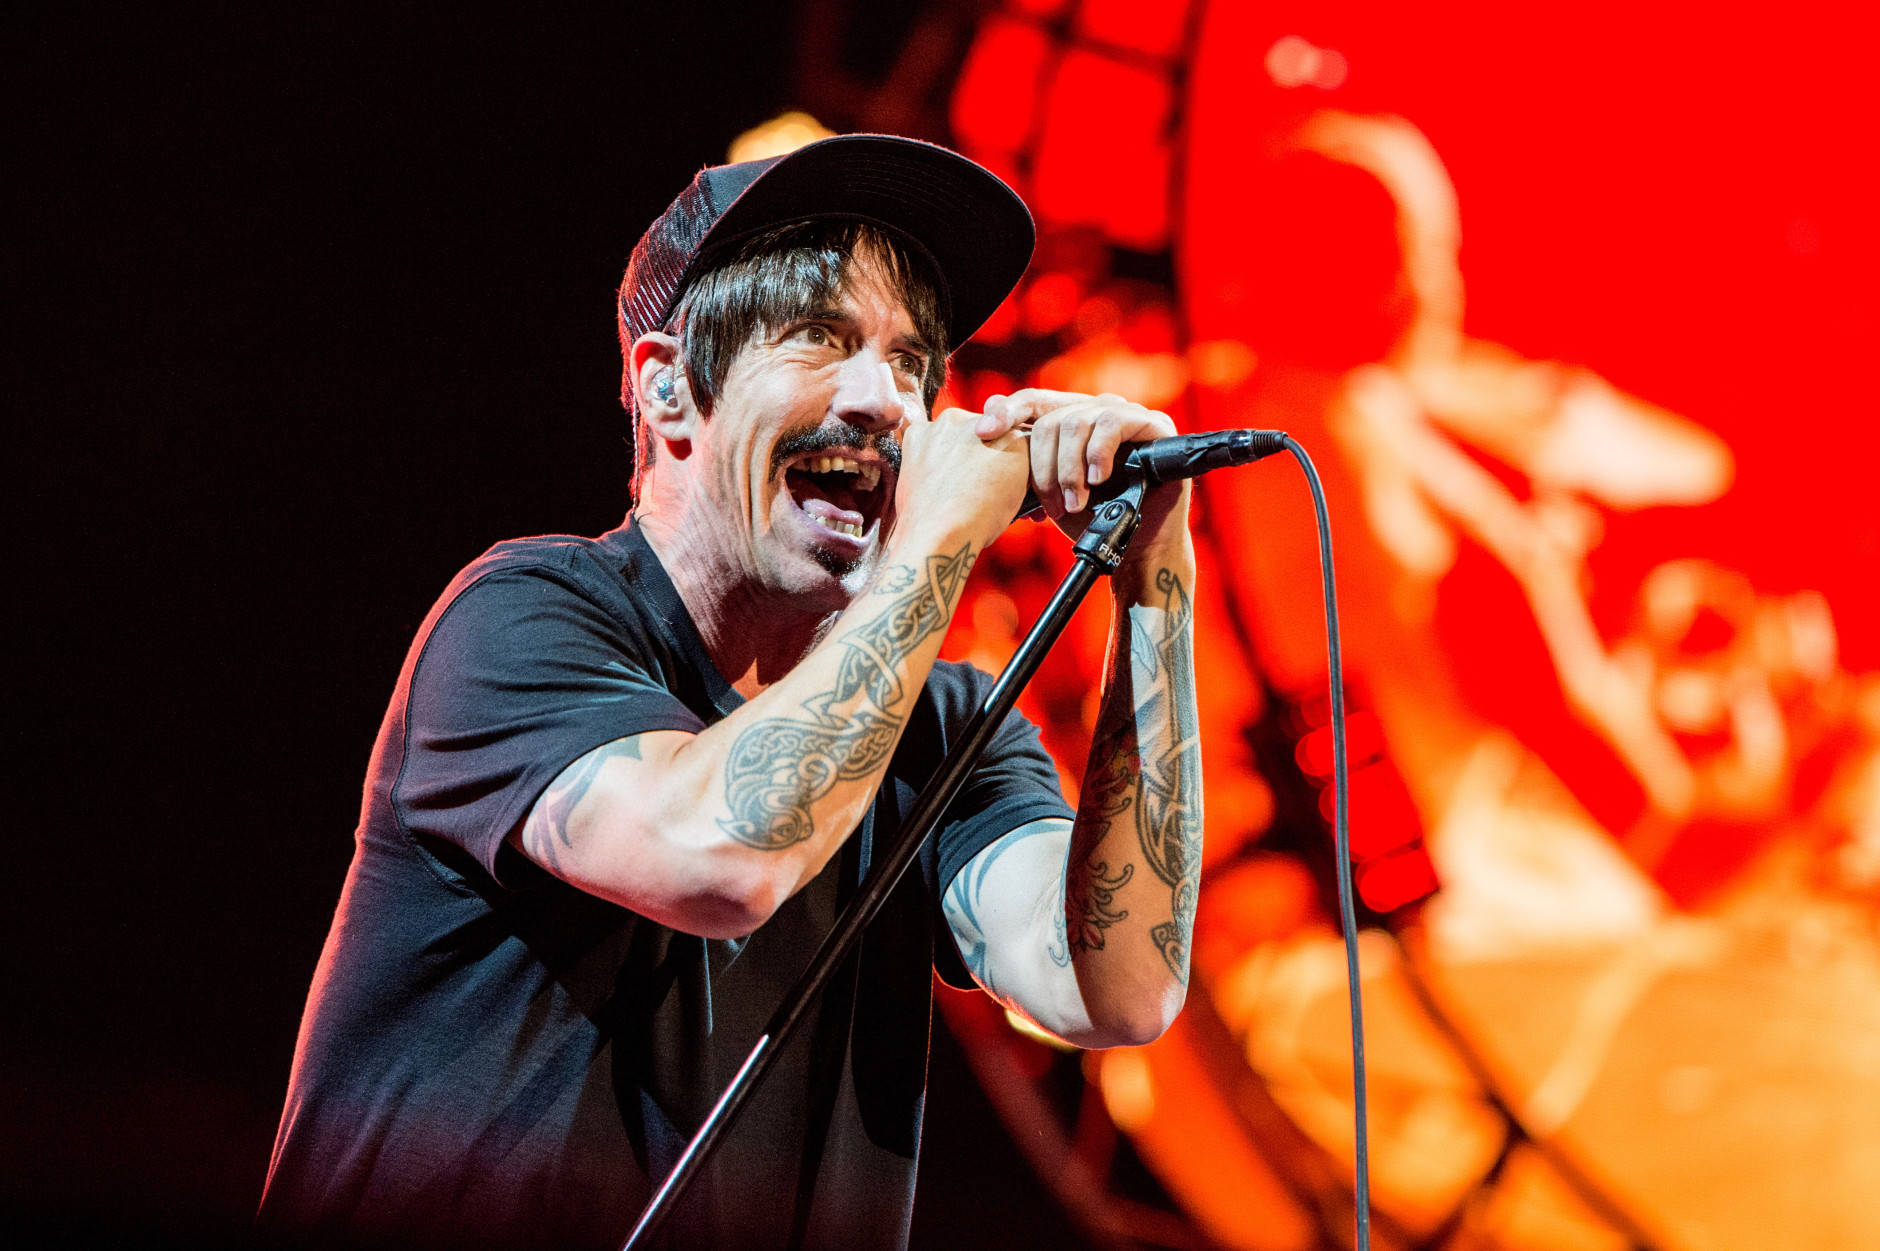 FILE - In this July 30, 2016 file photo, Anthony Kiedis of Red Hot Chili Peppers performs at Lollapalooza in Chicago. The band will perform at the Los Angeles Memorial Coliseum before the Rams take on the Seattle Seahawks. The Rams moved to Los Angeles this season since leaving for St. Louis in 1994. (Photo by Amy Harris/Invision/AP, File)